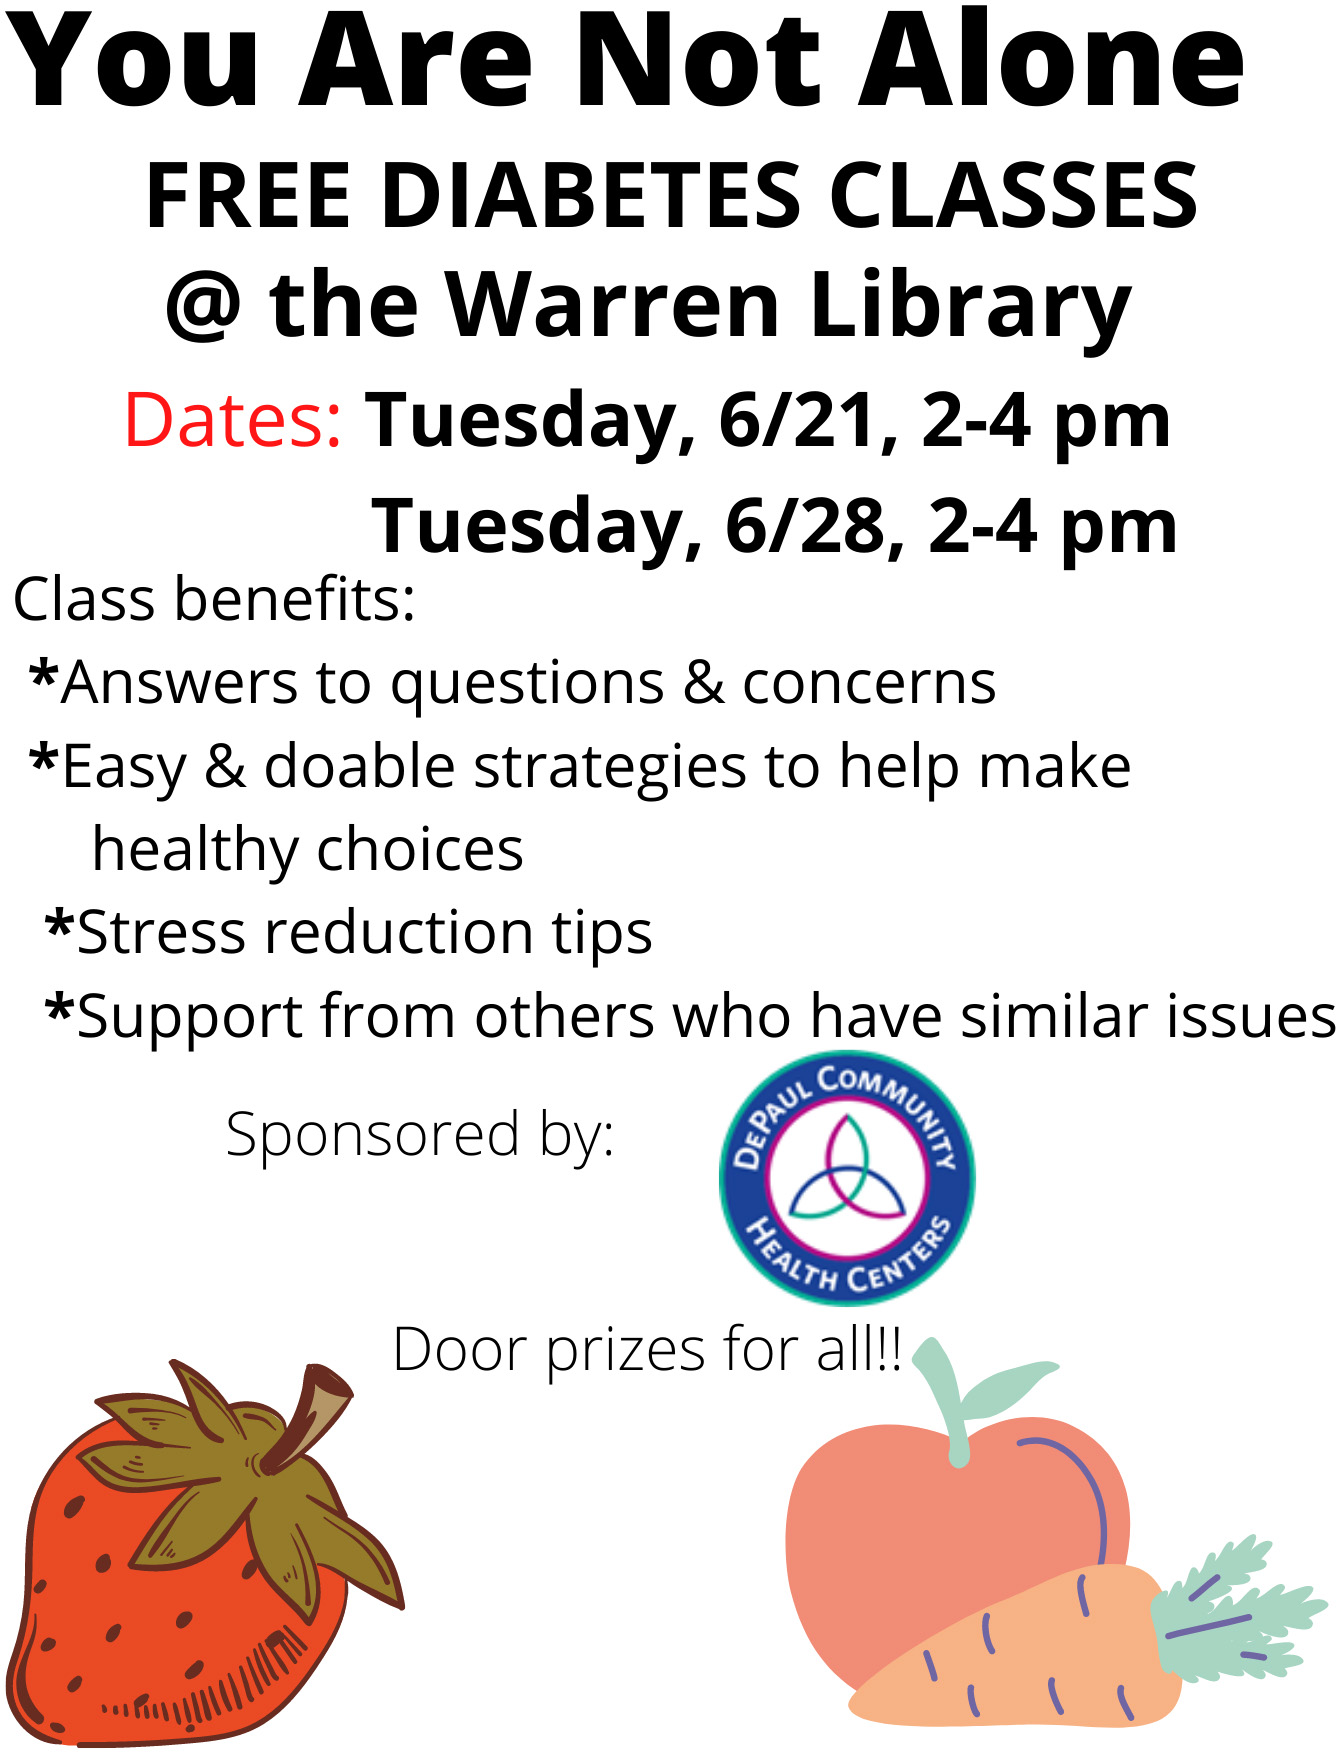 Free diabetes classes at the Warren Library